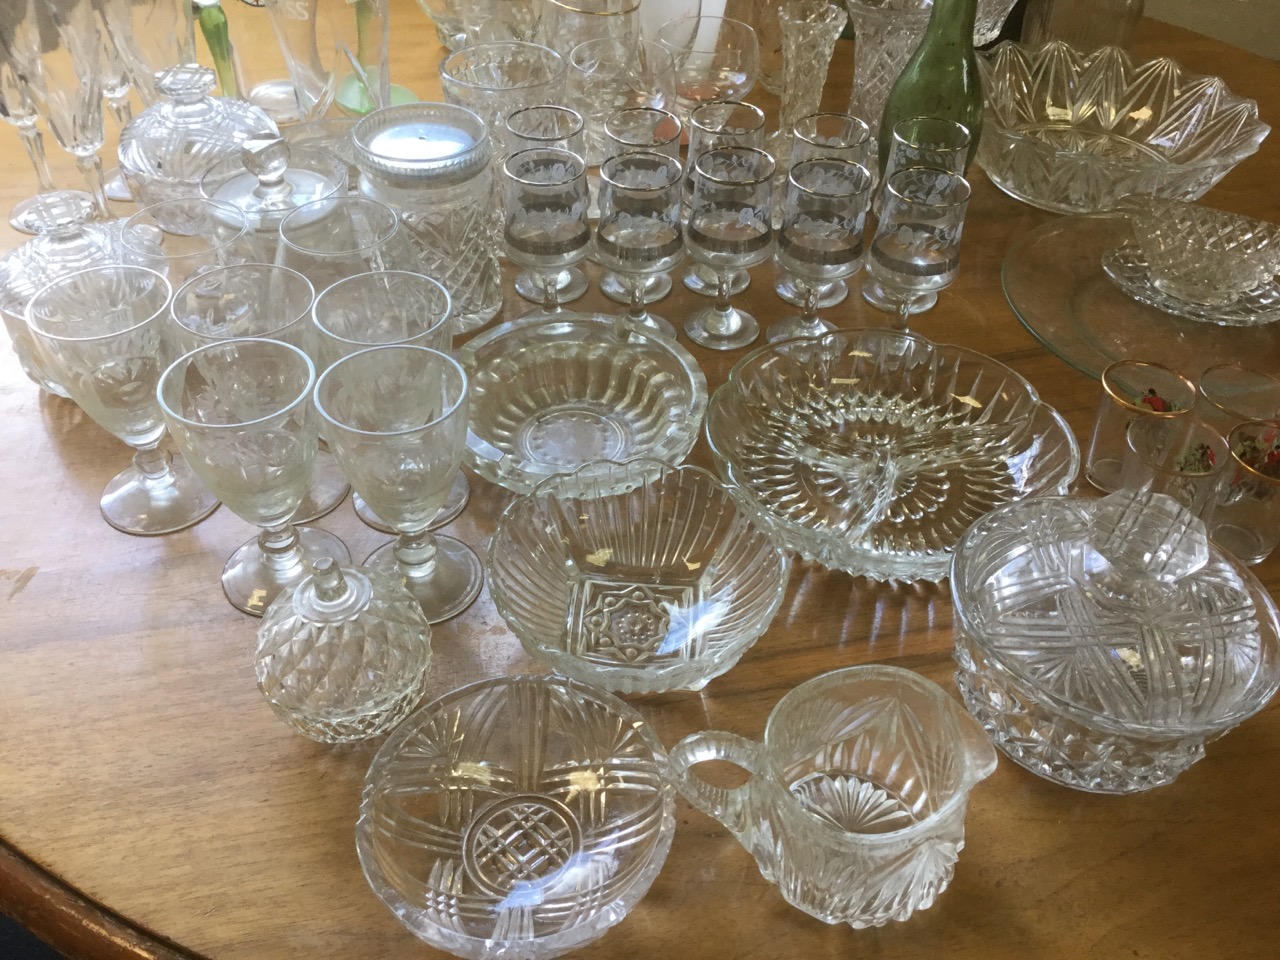 Miscellaneous glass including an Alnwick Brewery bottle, sets of glasses, fruit bowls, a - Image 5 of 6